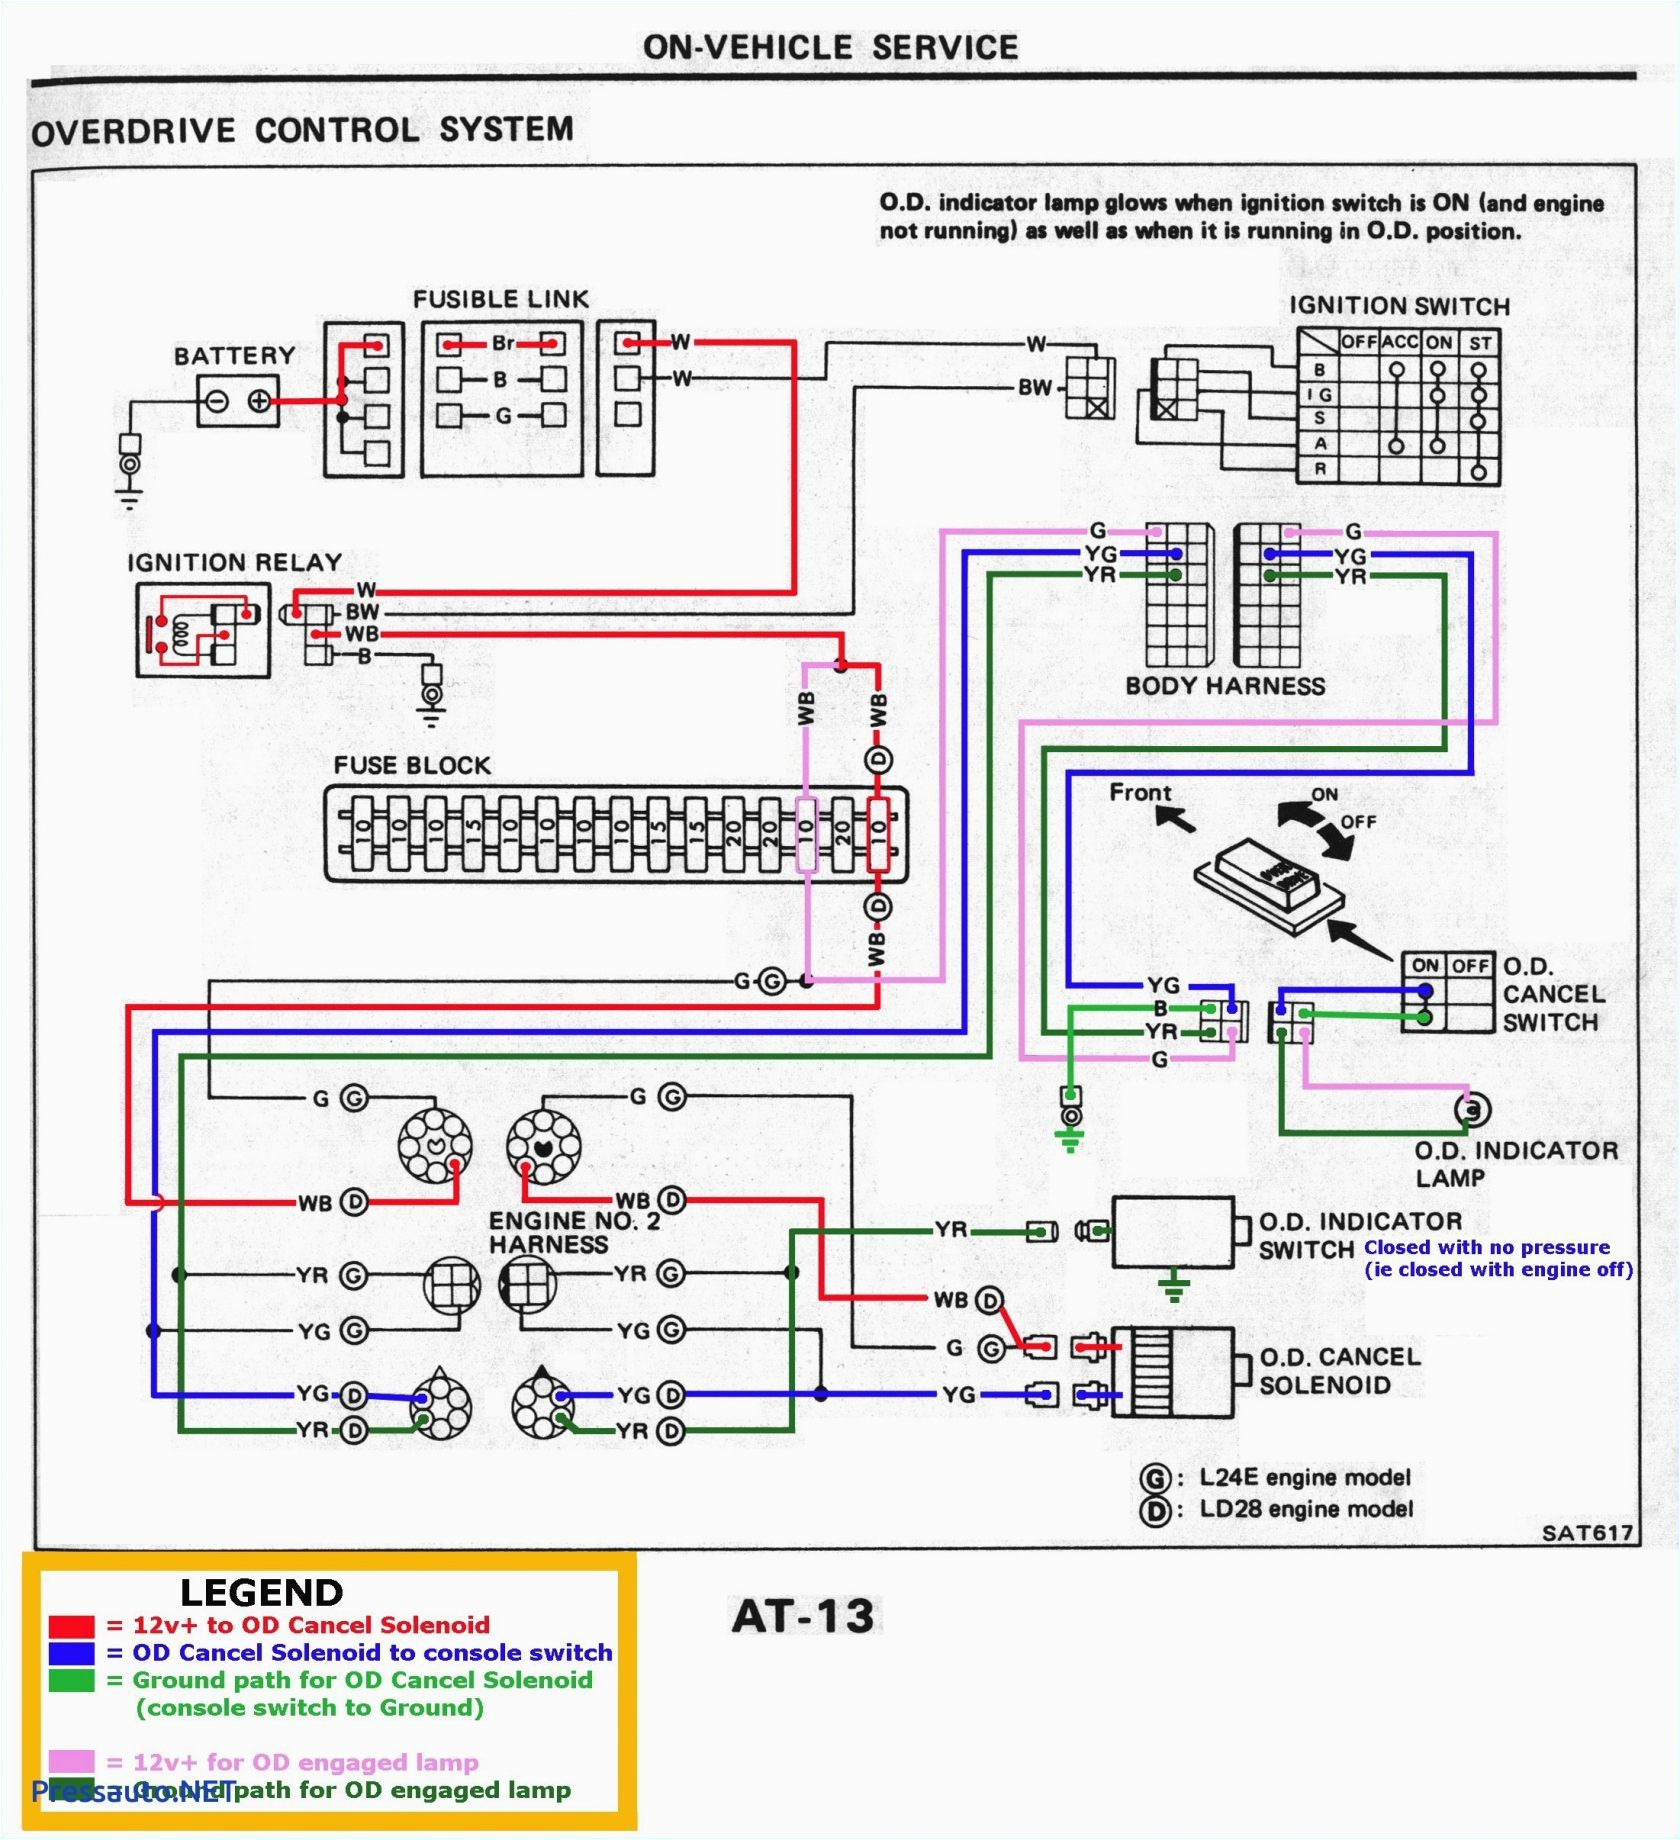 fuel system diagram likewise 2002 chevy tahoe a c system diagram 2002 chevy tahoe ac system diagram fuel pump relay location 2005 chevy